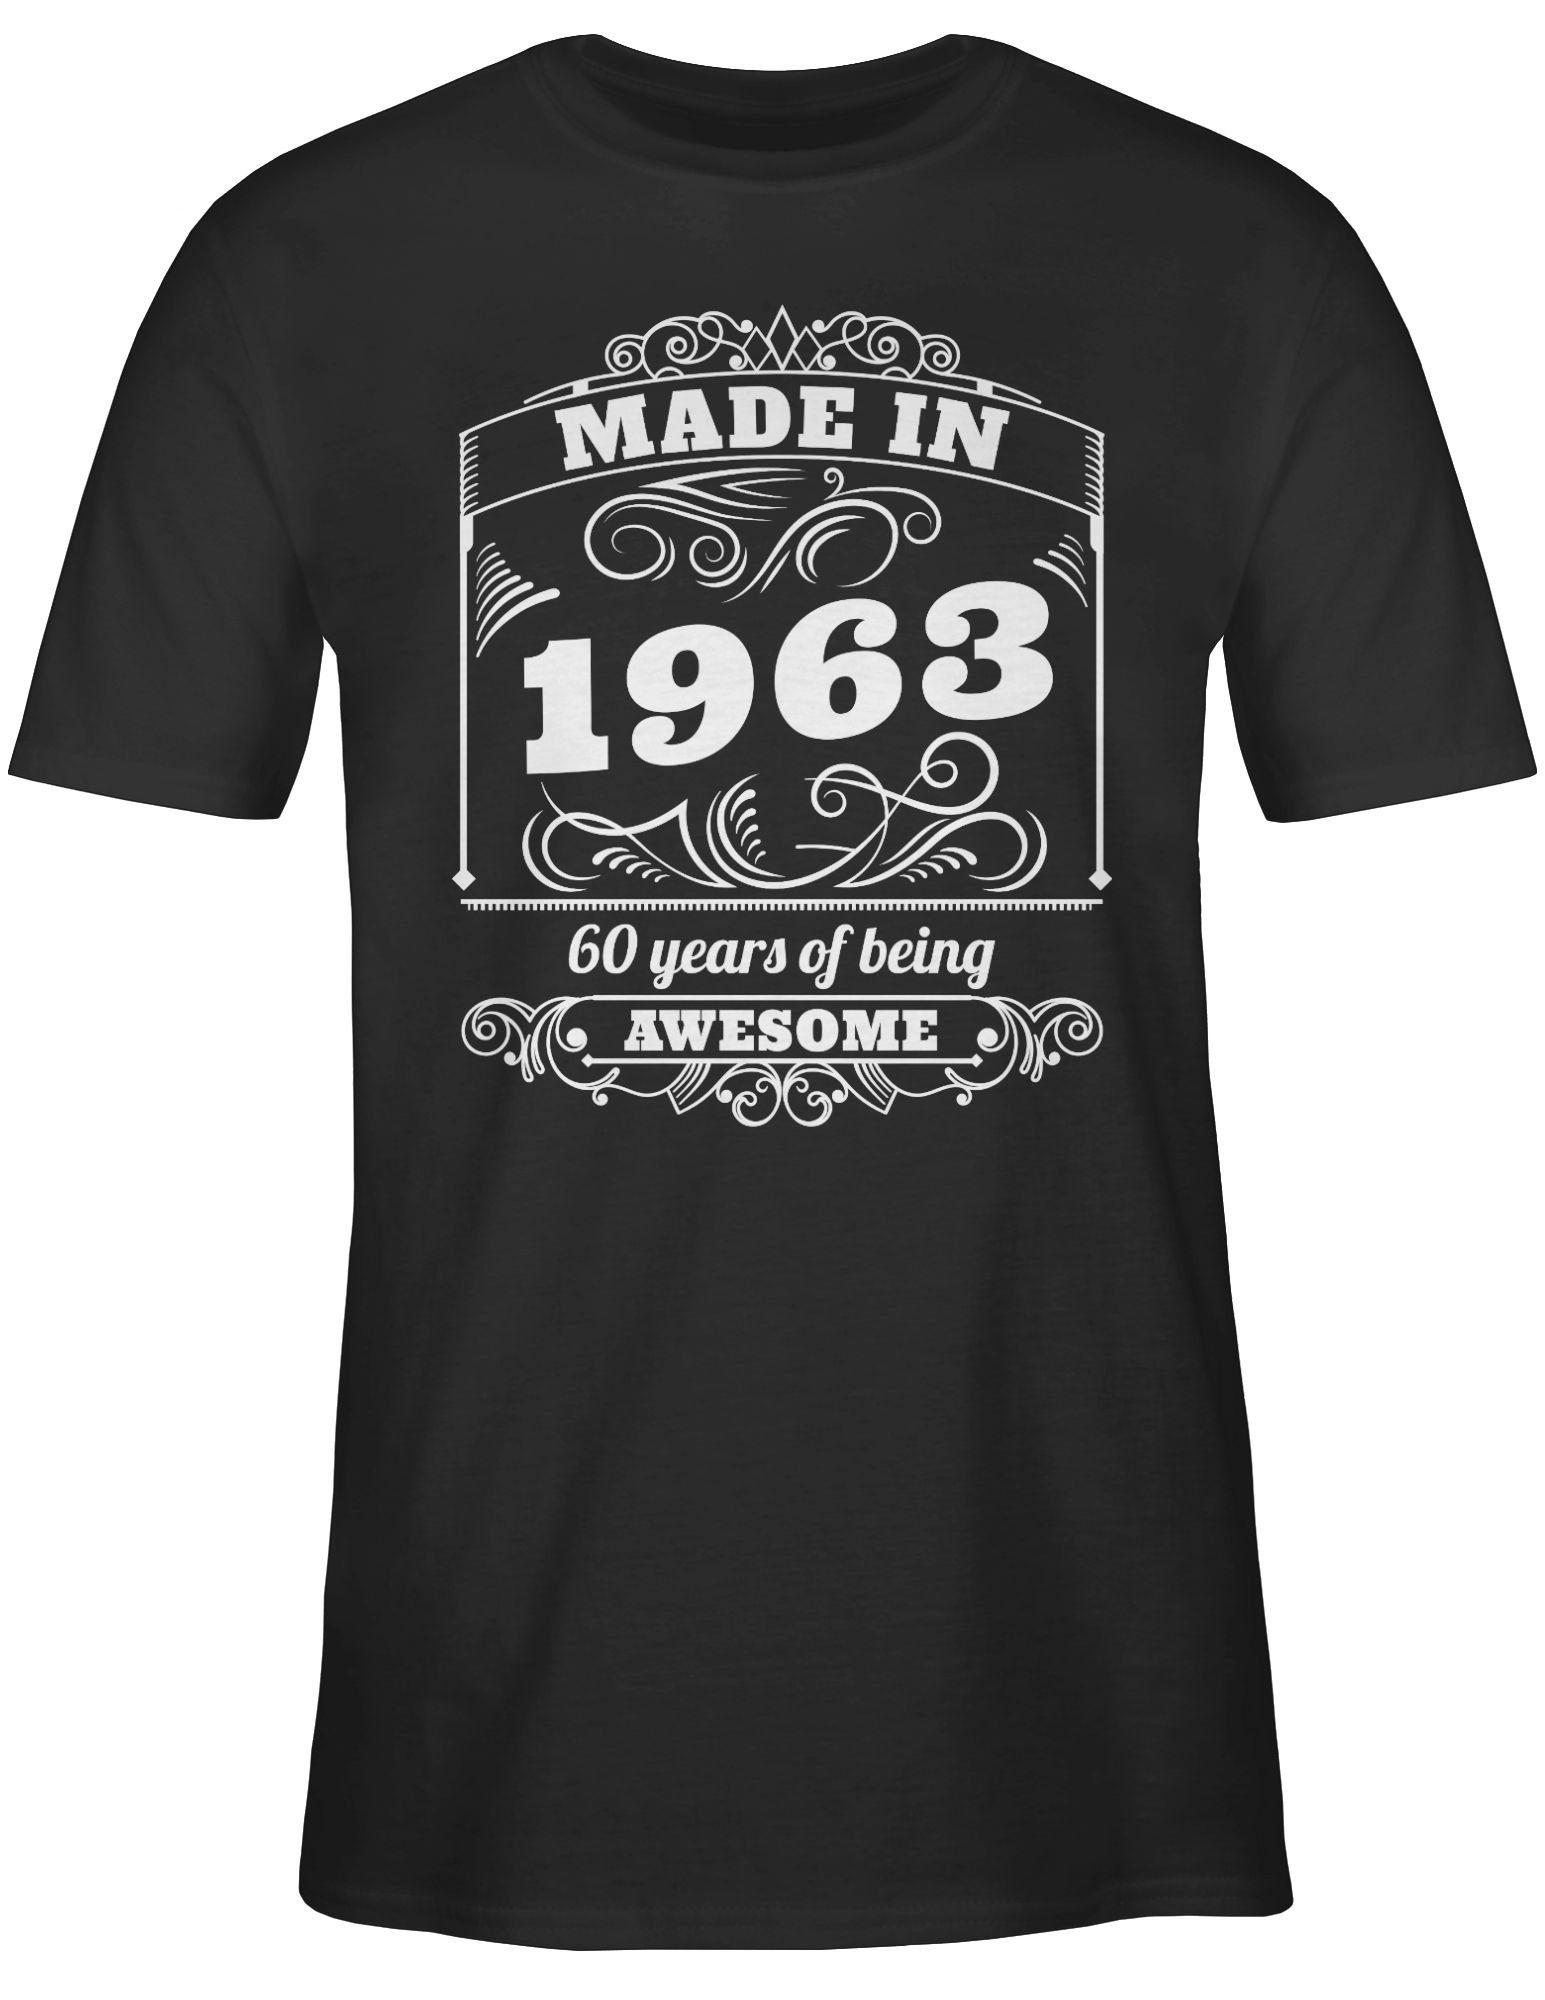 1 1963 Geburtstag of Schwarz T-Shirt 60. Made being in Sixty Shirtracer awesome years